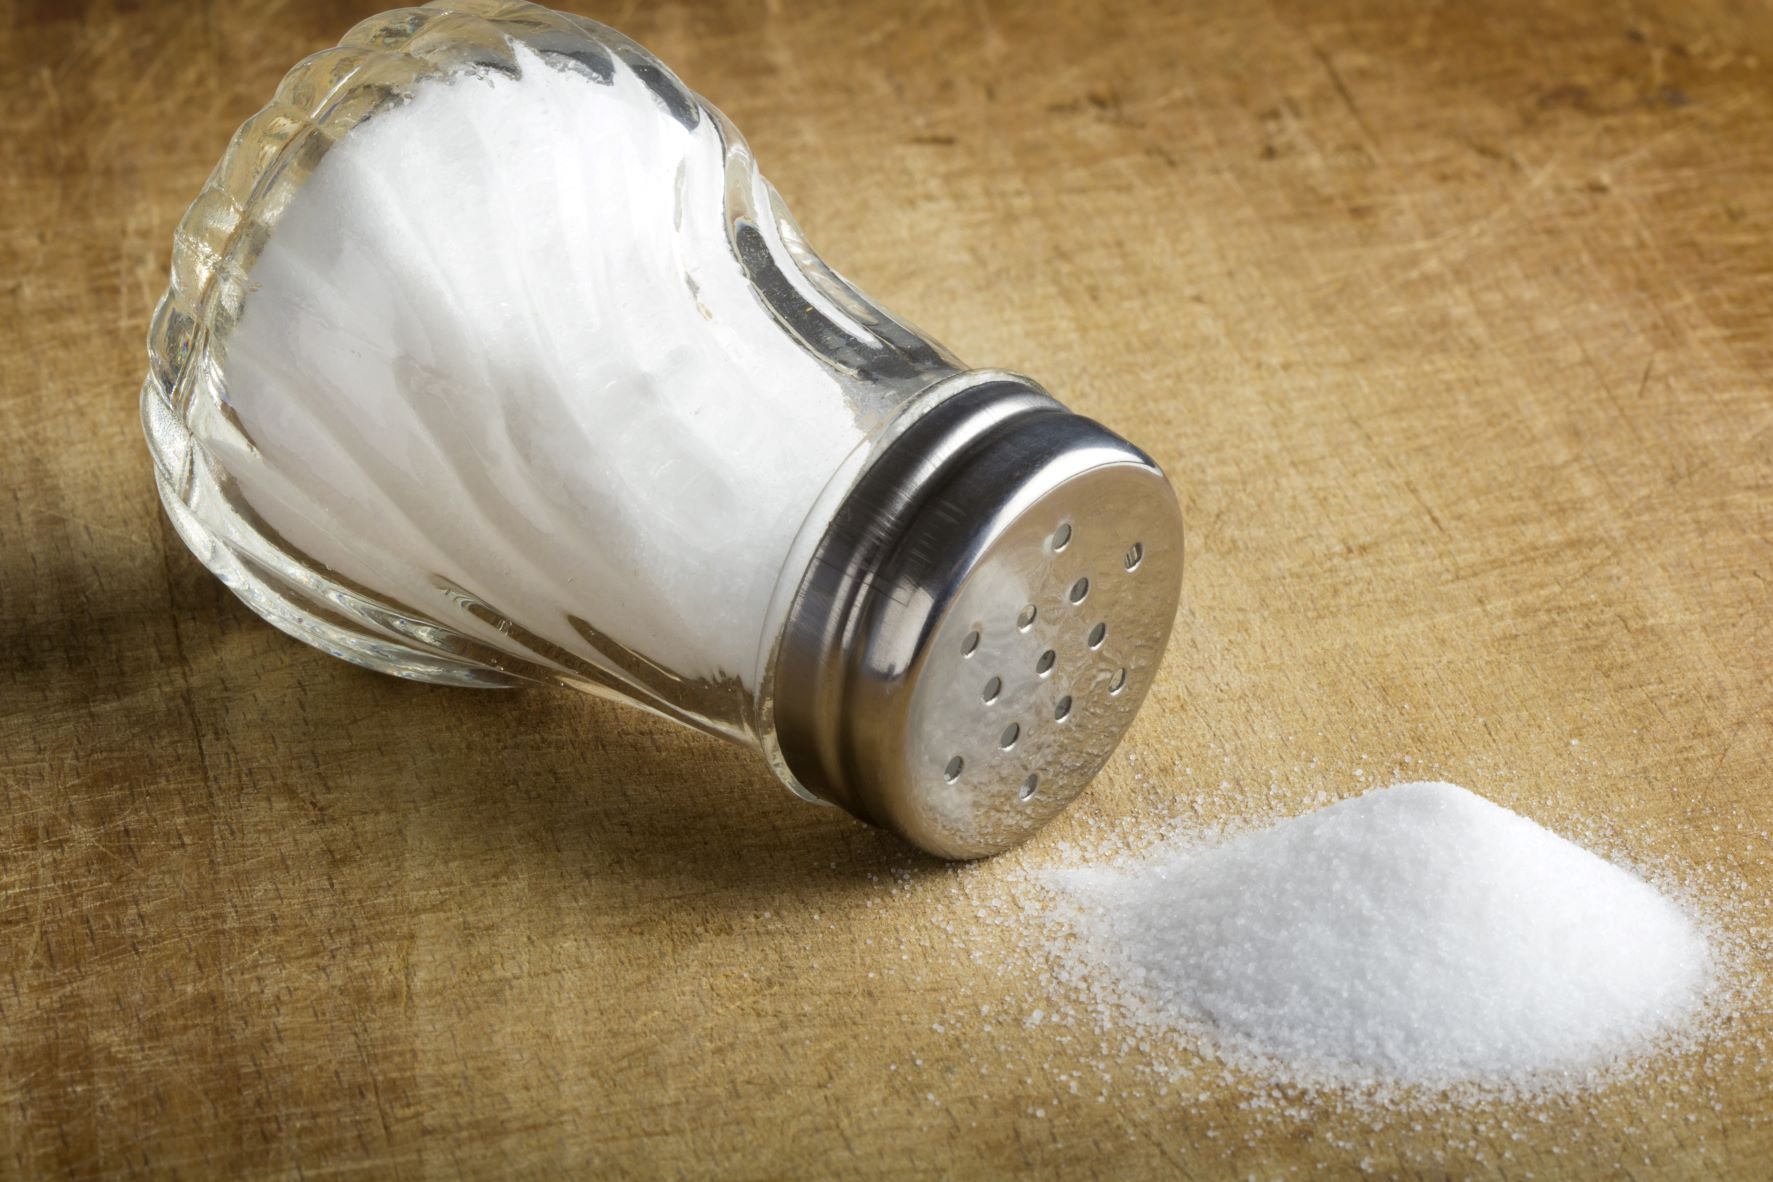 How Can Reducing Sodium Intake Improve Health?